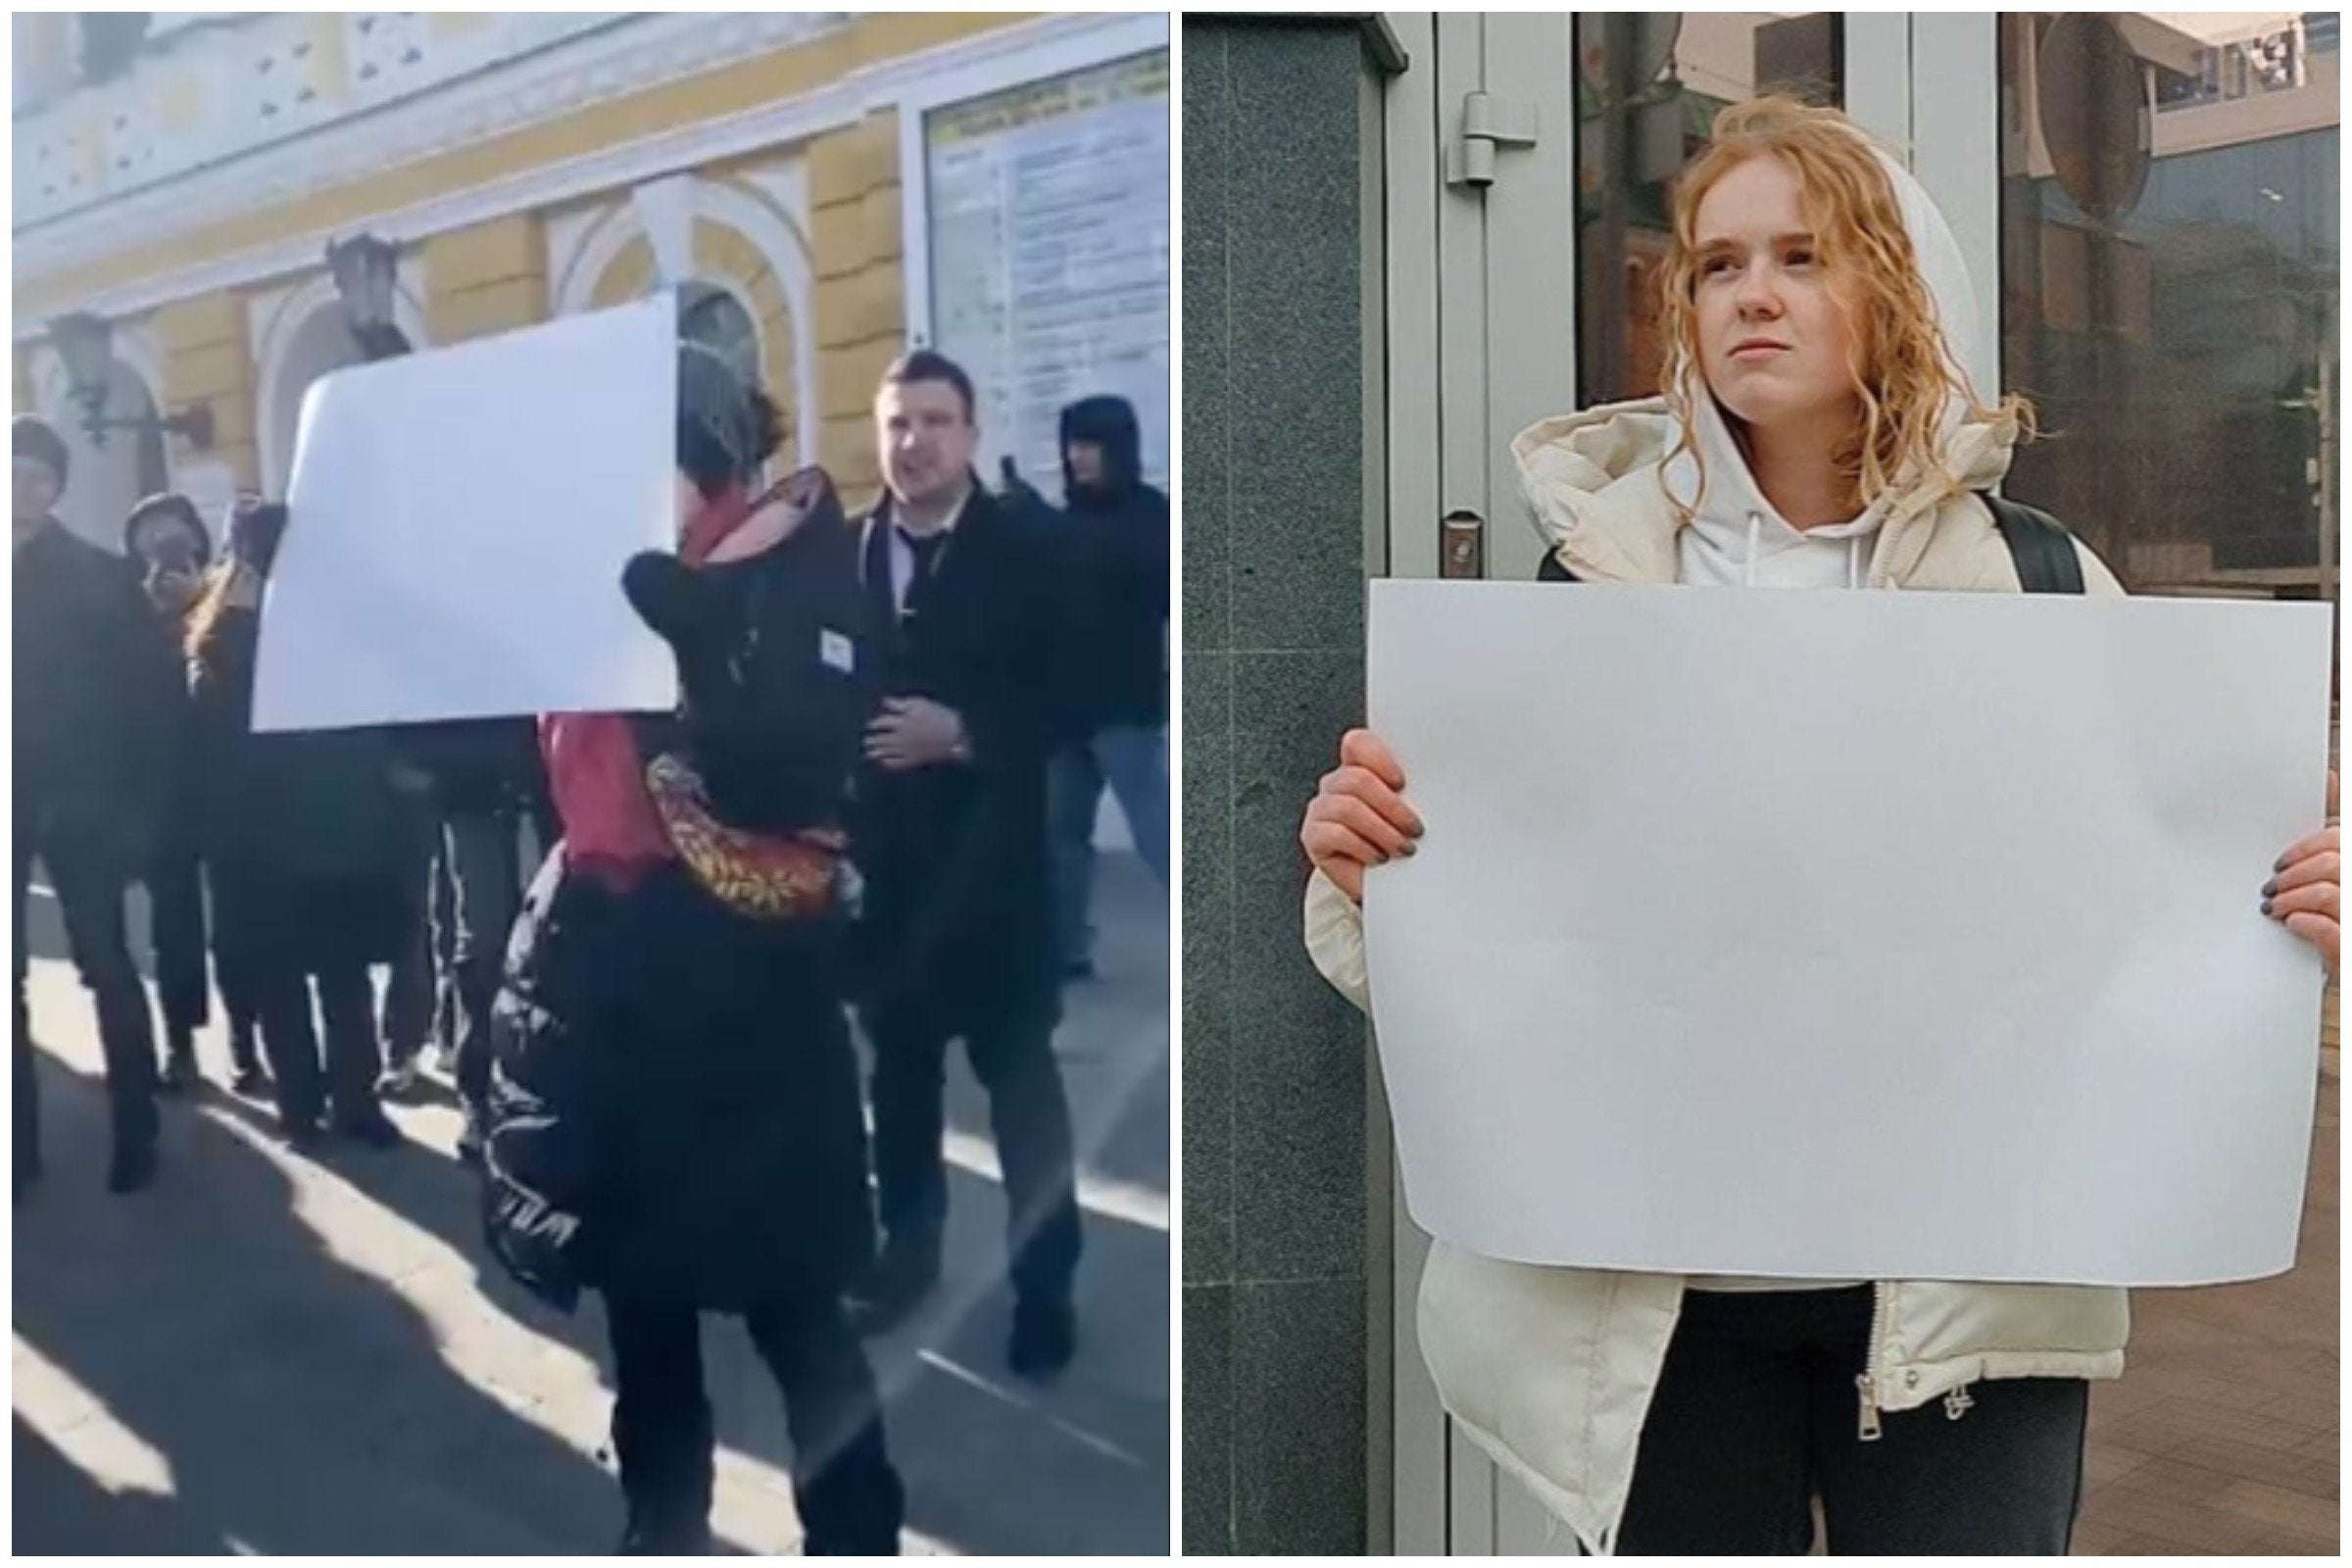 image for Russia Arrests Multiple People for Holding Up Blank Signs